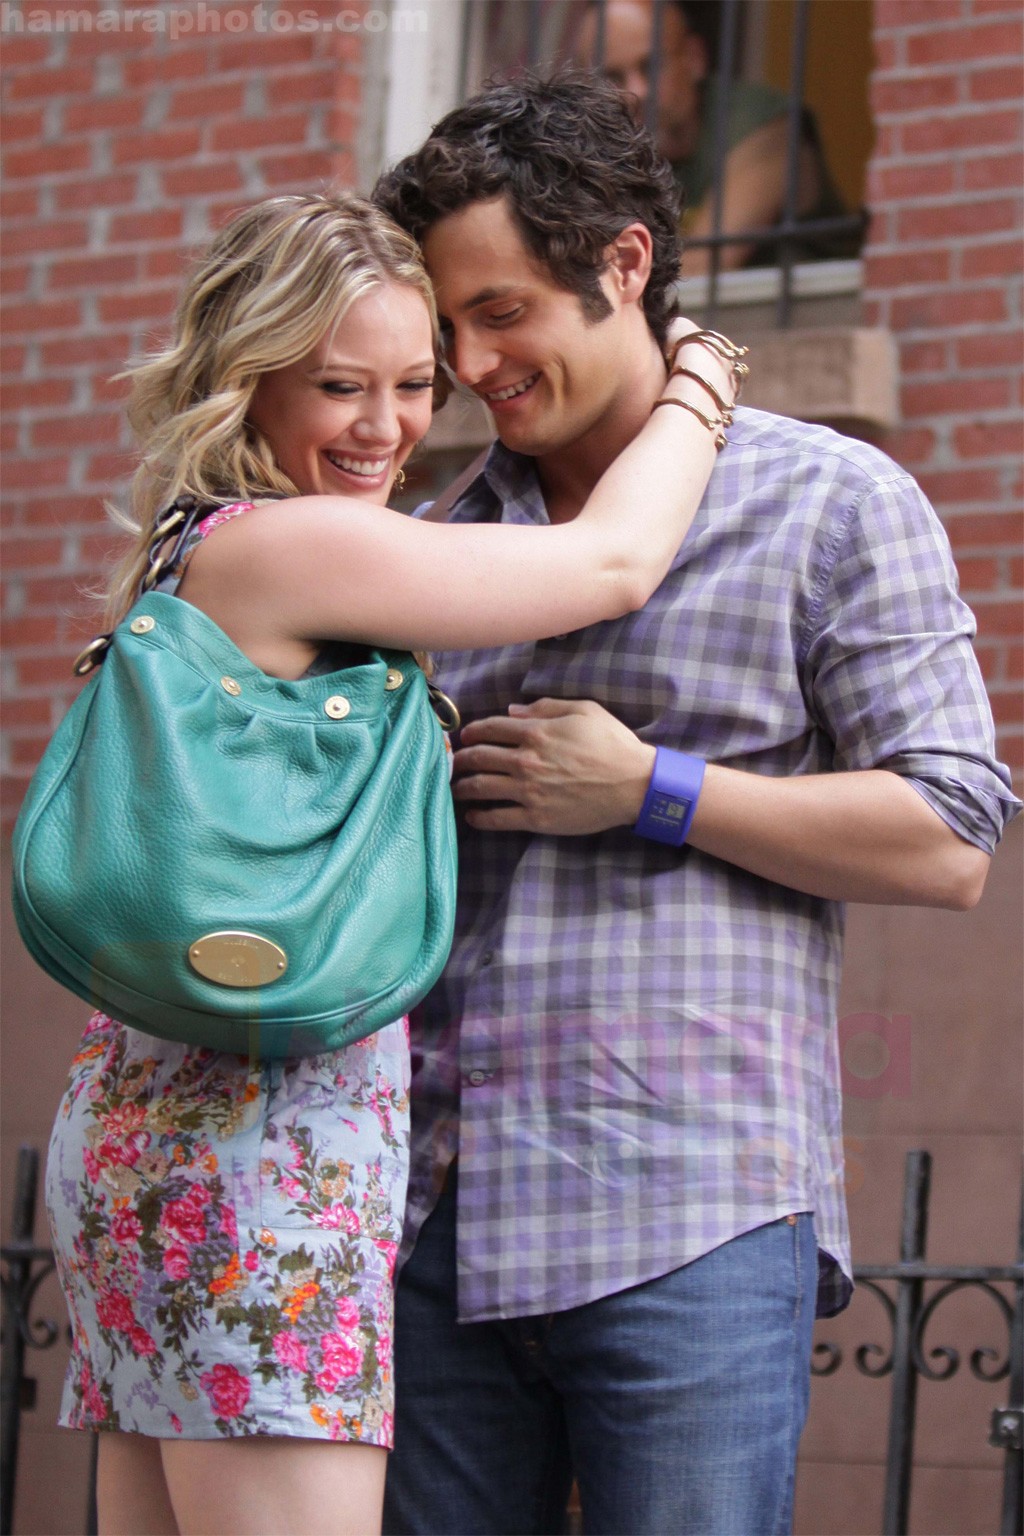 Hilary Duff and Penn Badgley On The Set Of GOSSIP GIRL in New York City on 26th August 2009 